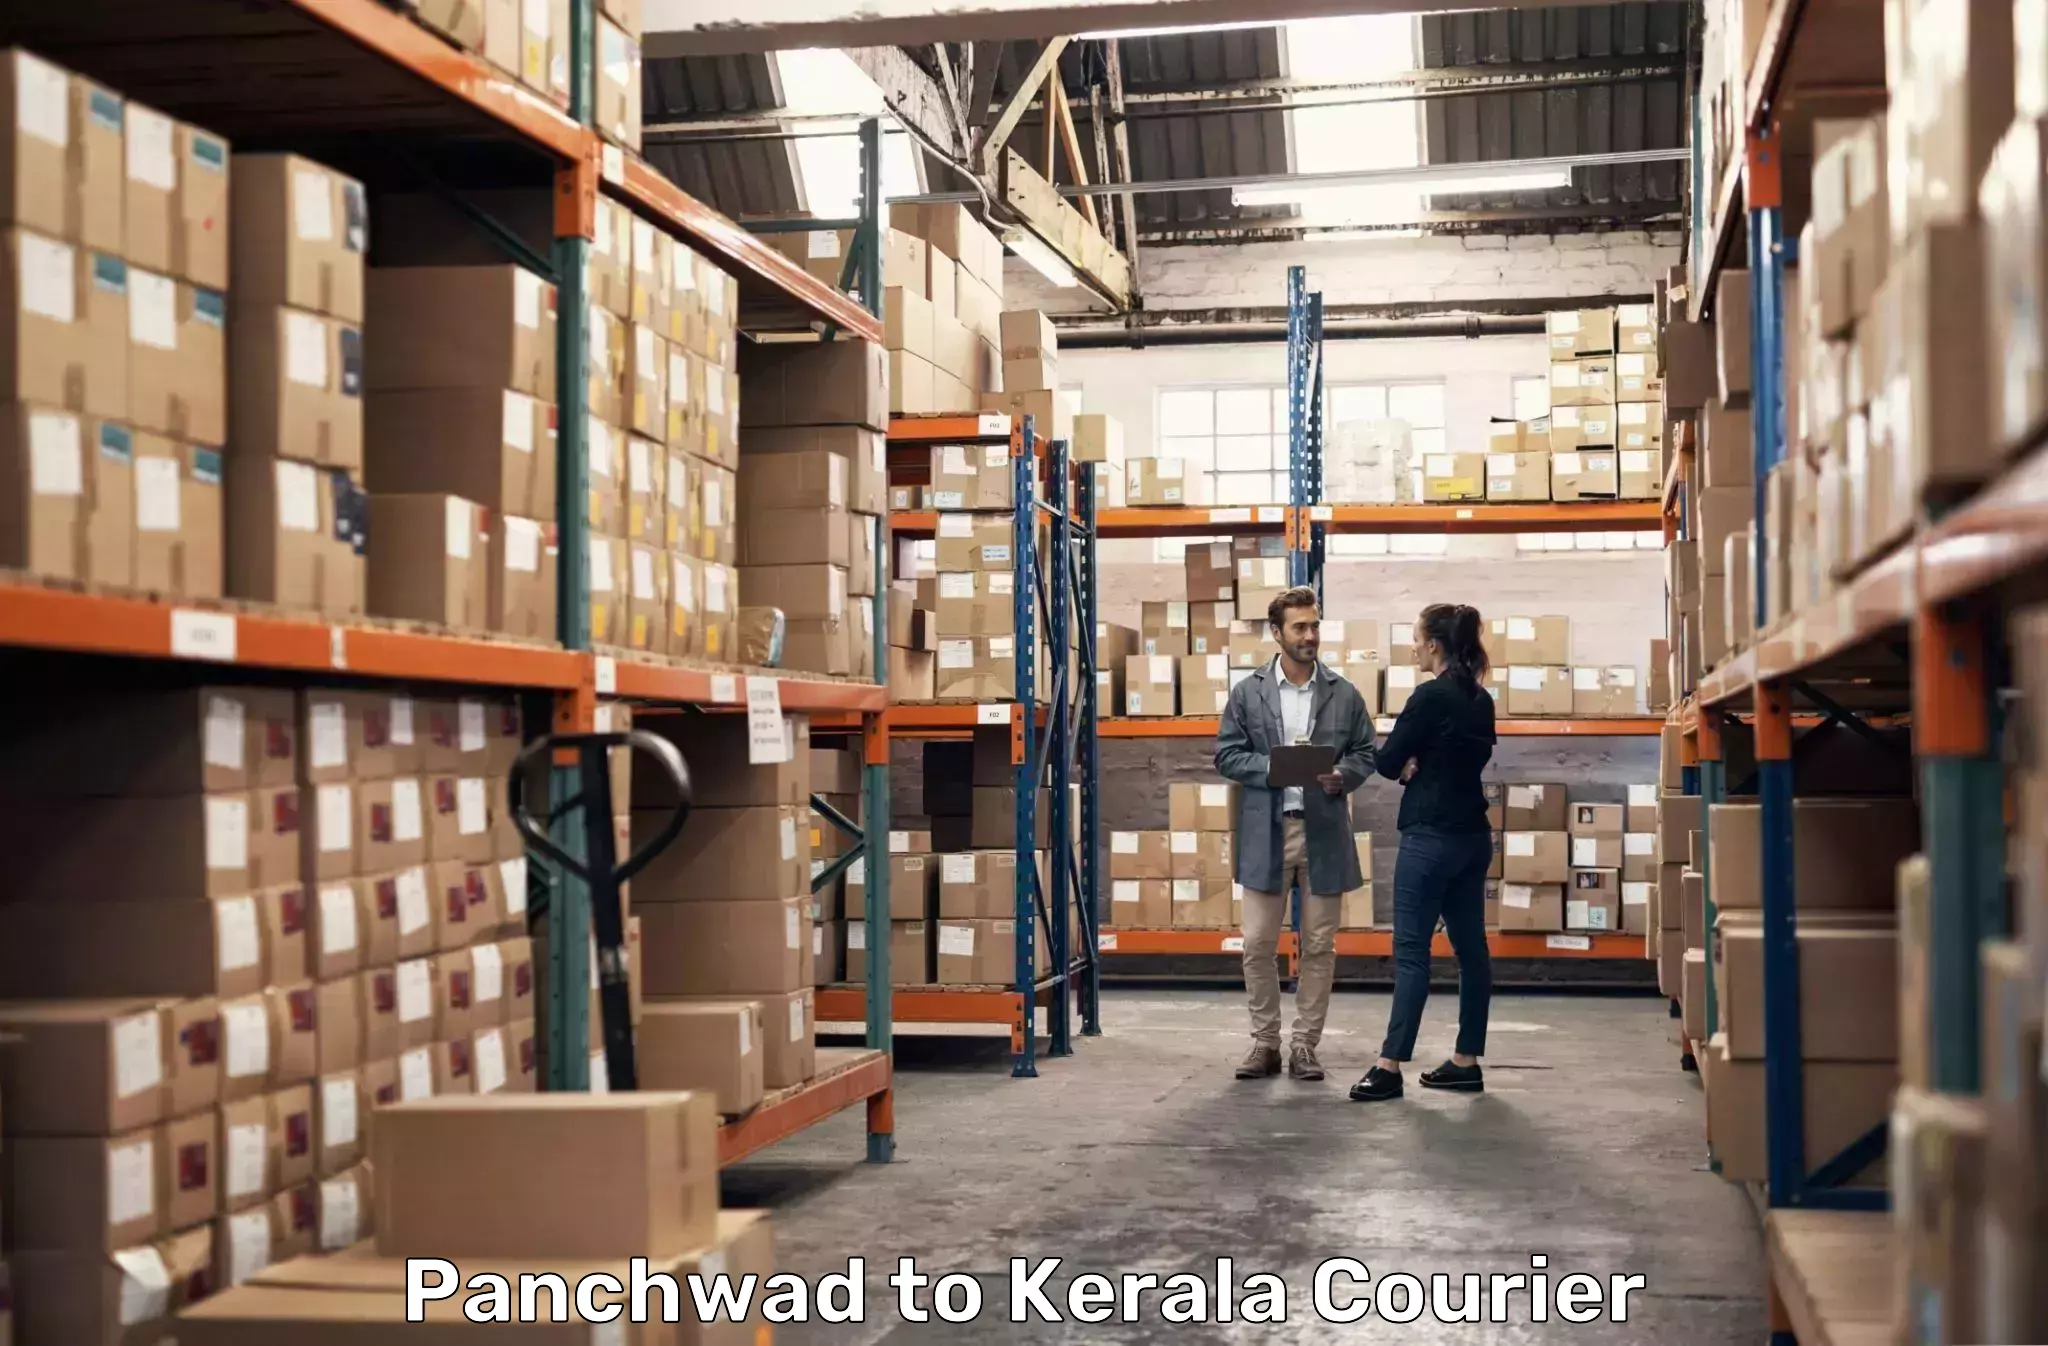 Courier app Panchwad to Kerala